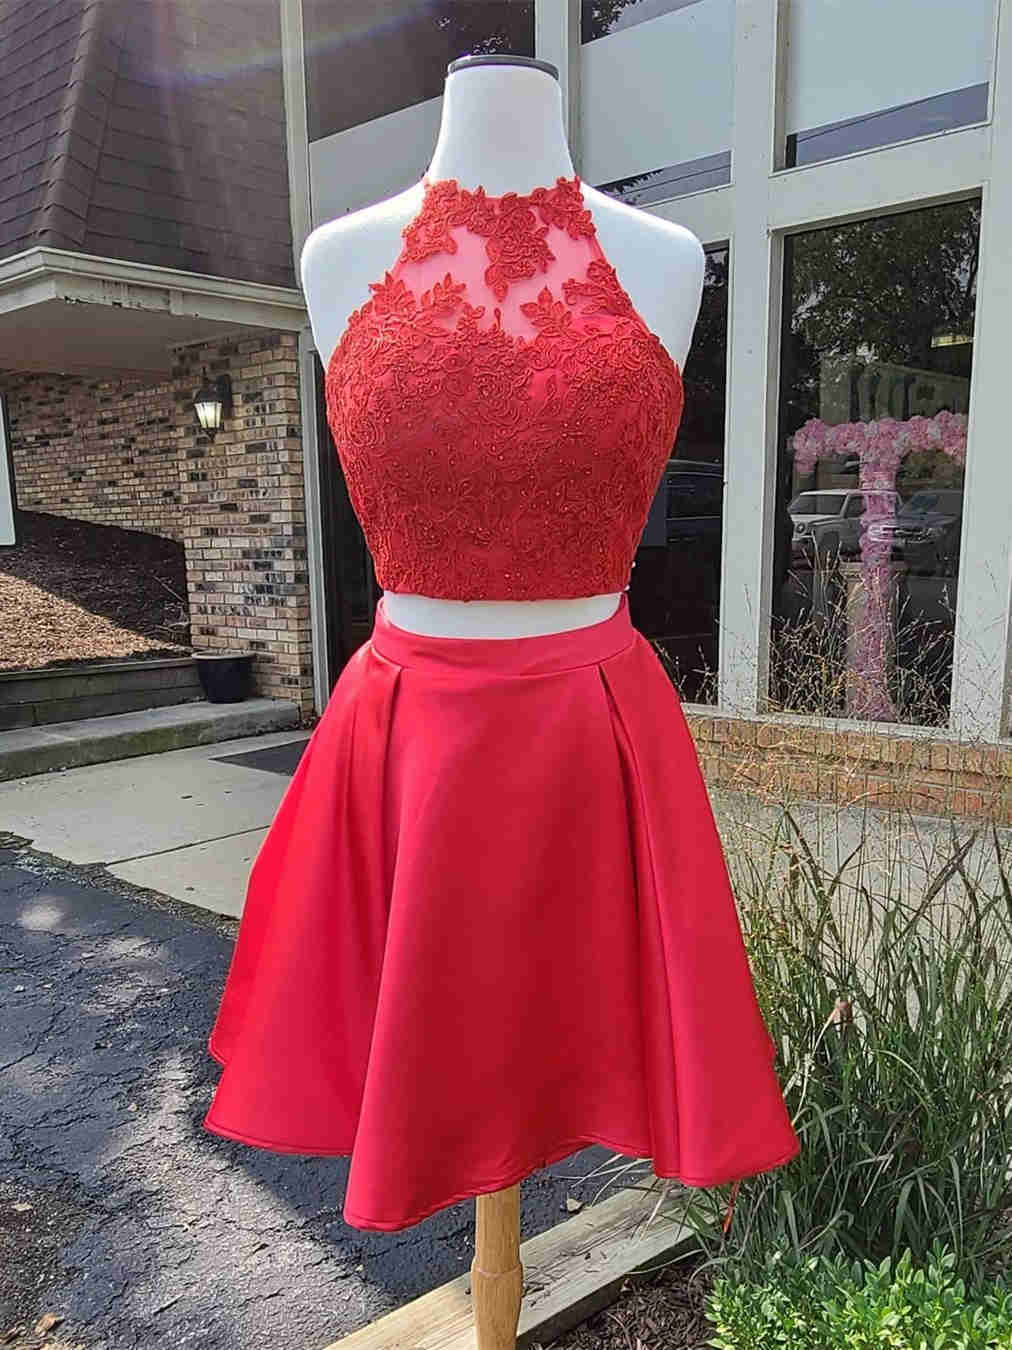 Two Piece Lace Appliqued Short Homecoming Dress Two Piece Lace Appliqued Short Homecoming Dress cheap homecoming dress,homecoming dress 2020,short party dress,red short dress